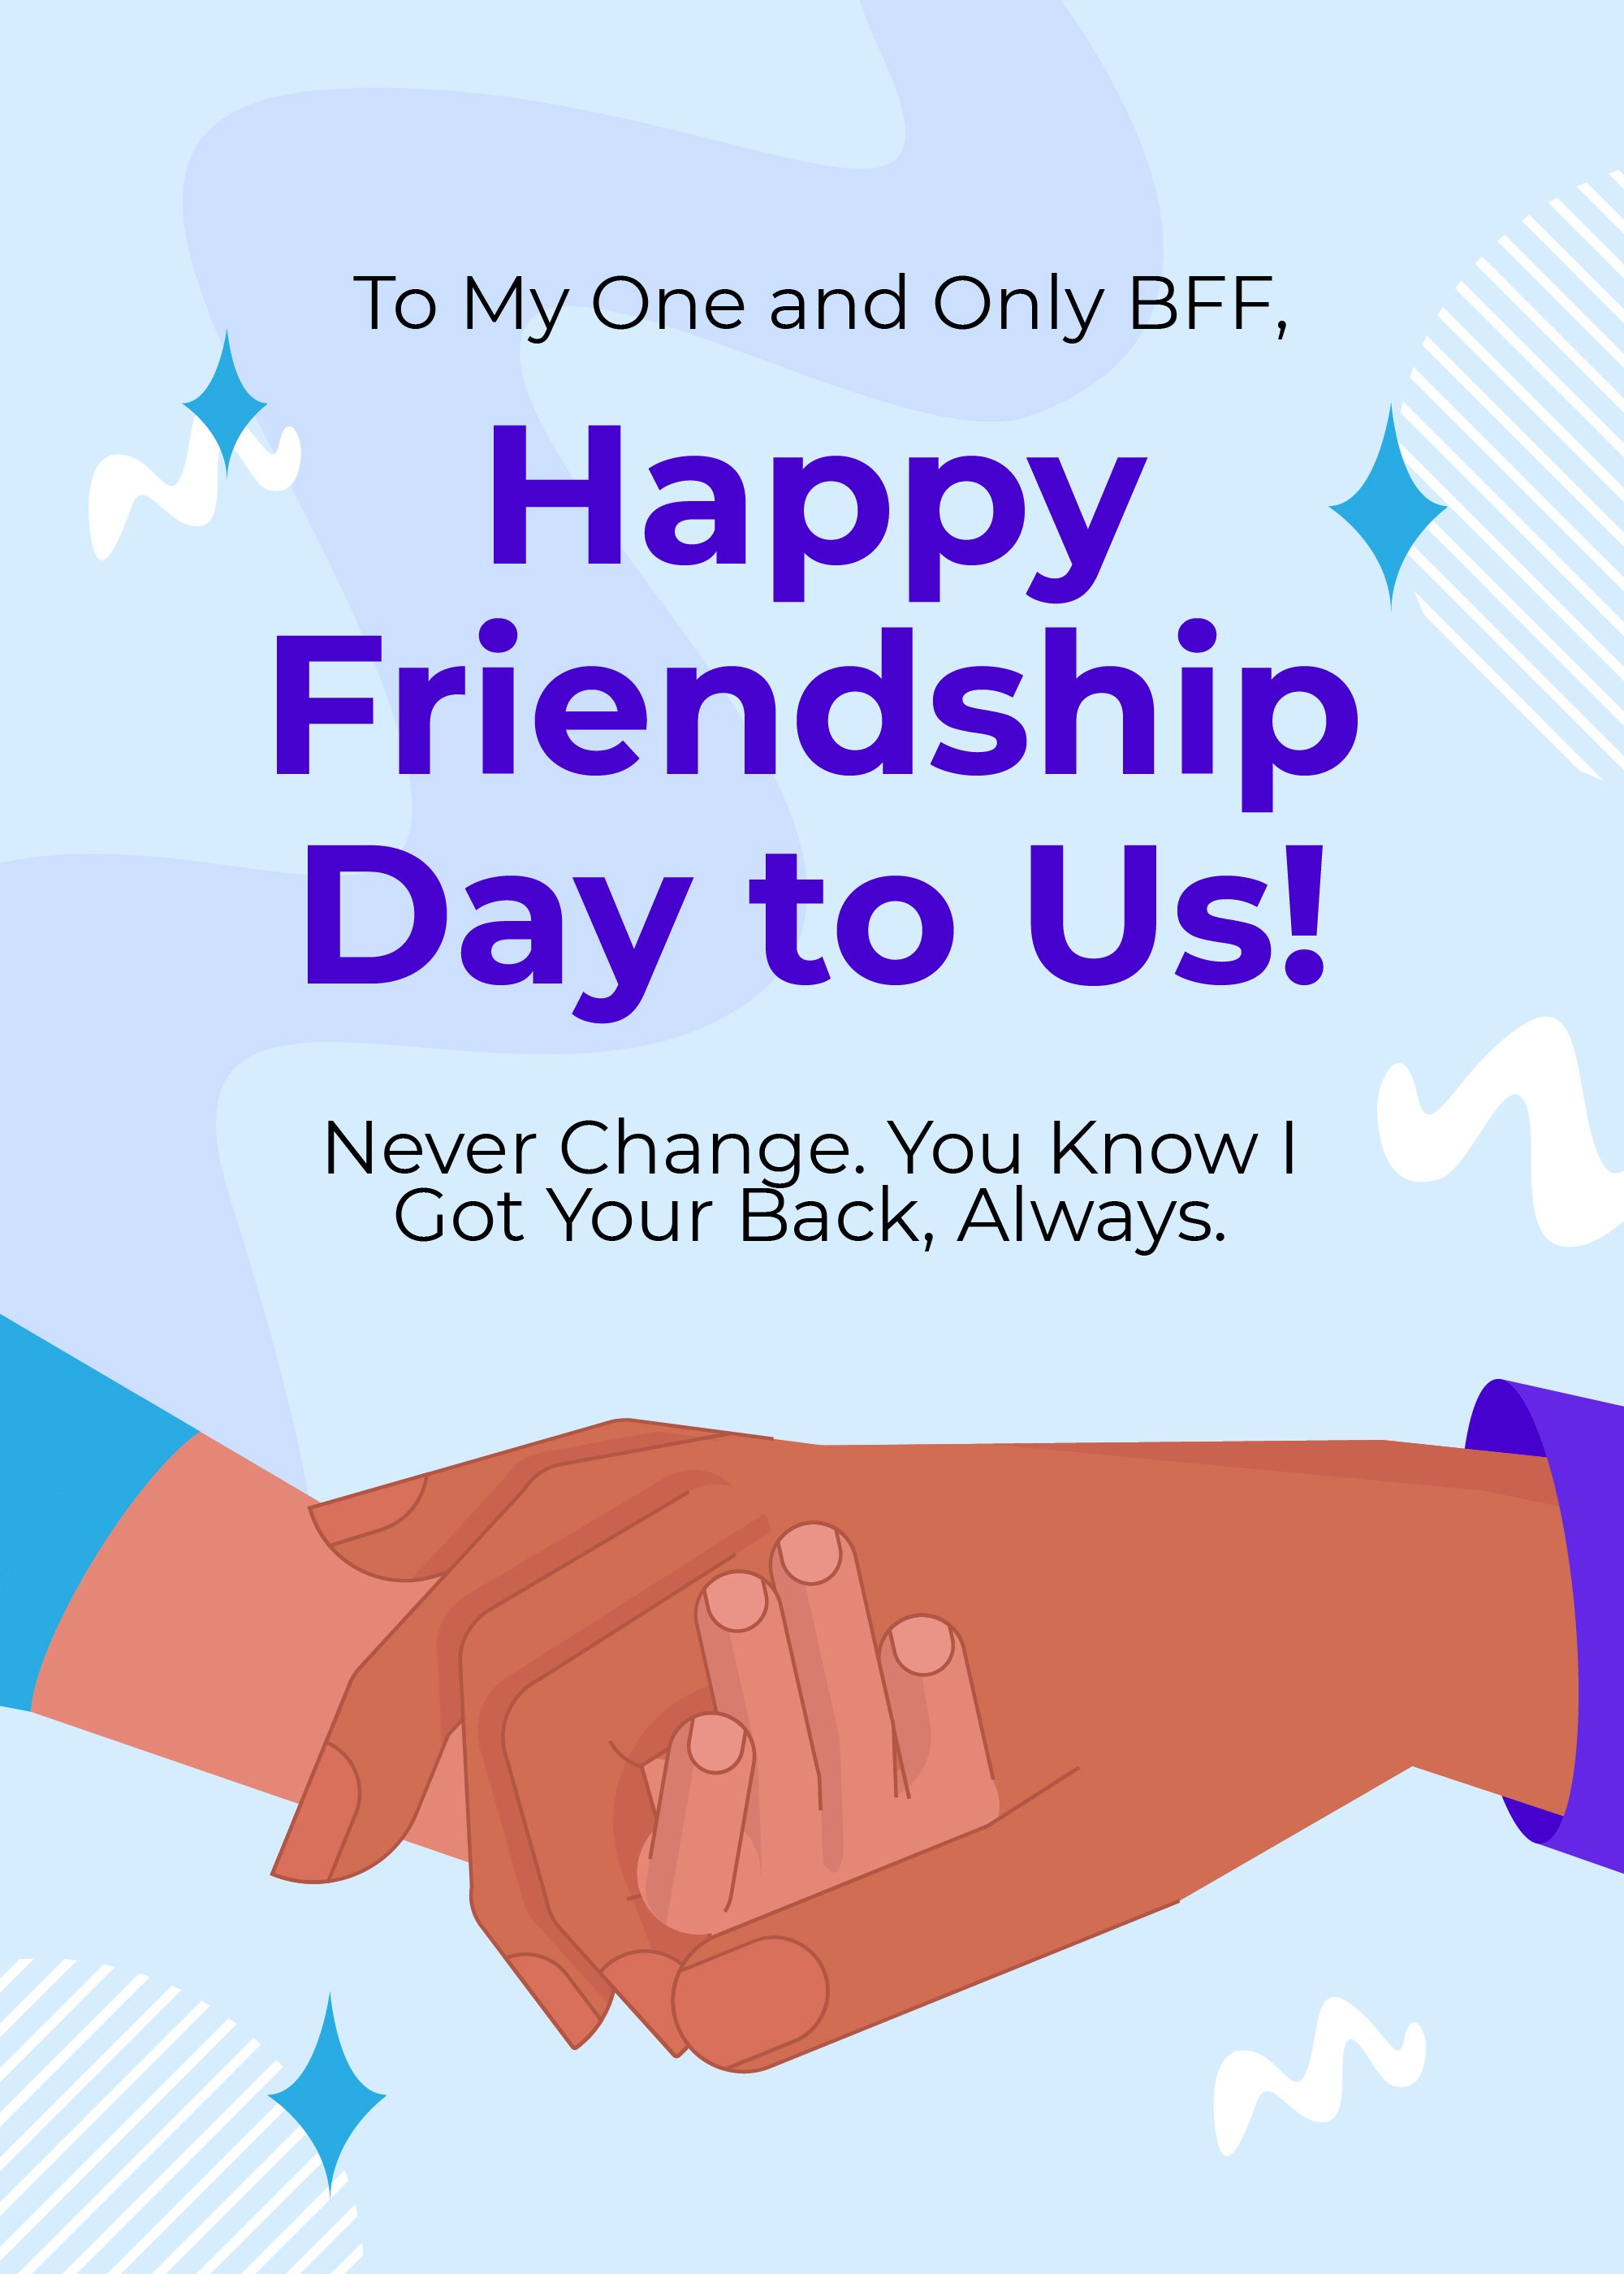 BFF Friendship Day Card Template